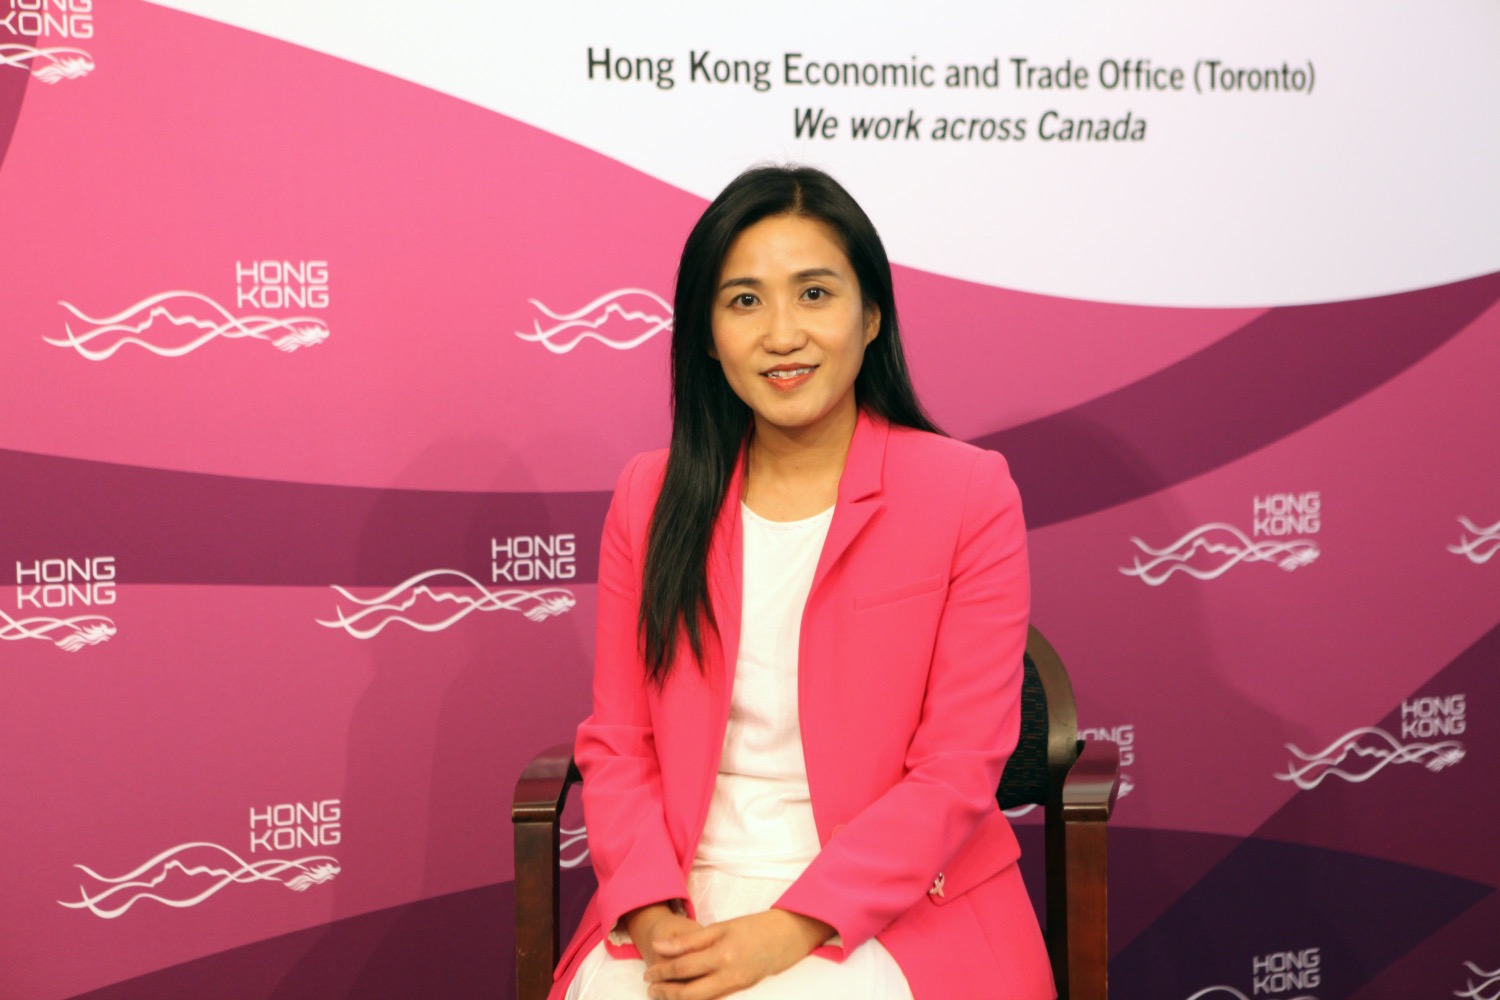 Director of the Hong Kong Economic and Trade Office (Toronto) (HKETO), Ms Emily Mo, spoke at the launching ceremony of the Women's International Network (WIN) hosted by the Hong Kong-Canada Business Association (HKCBA) (Toronto Section) on June 8. 